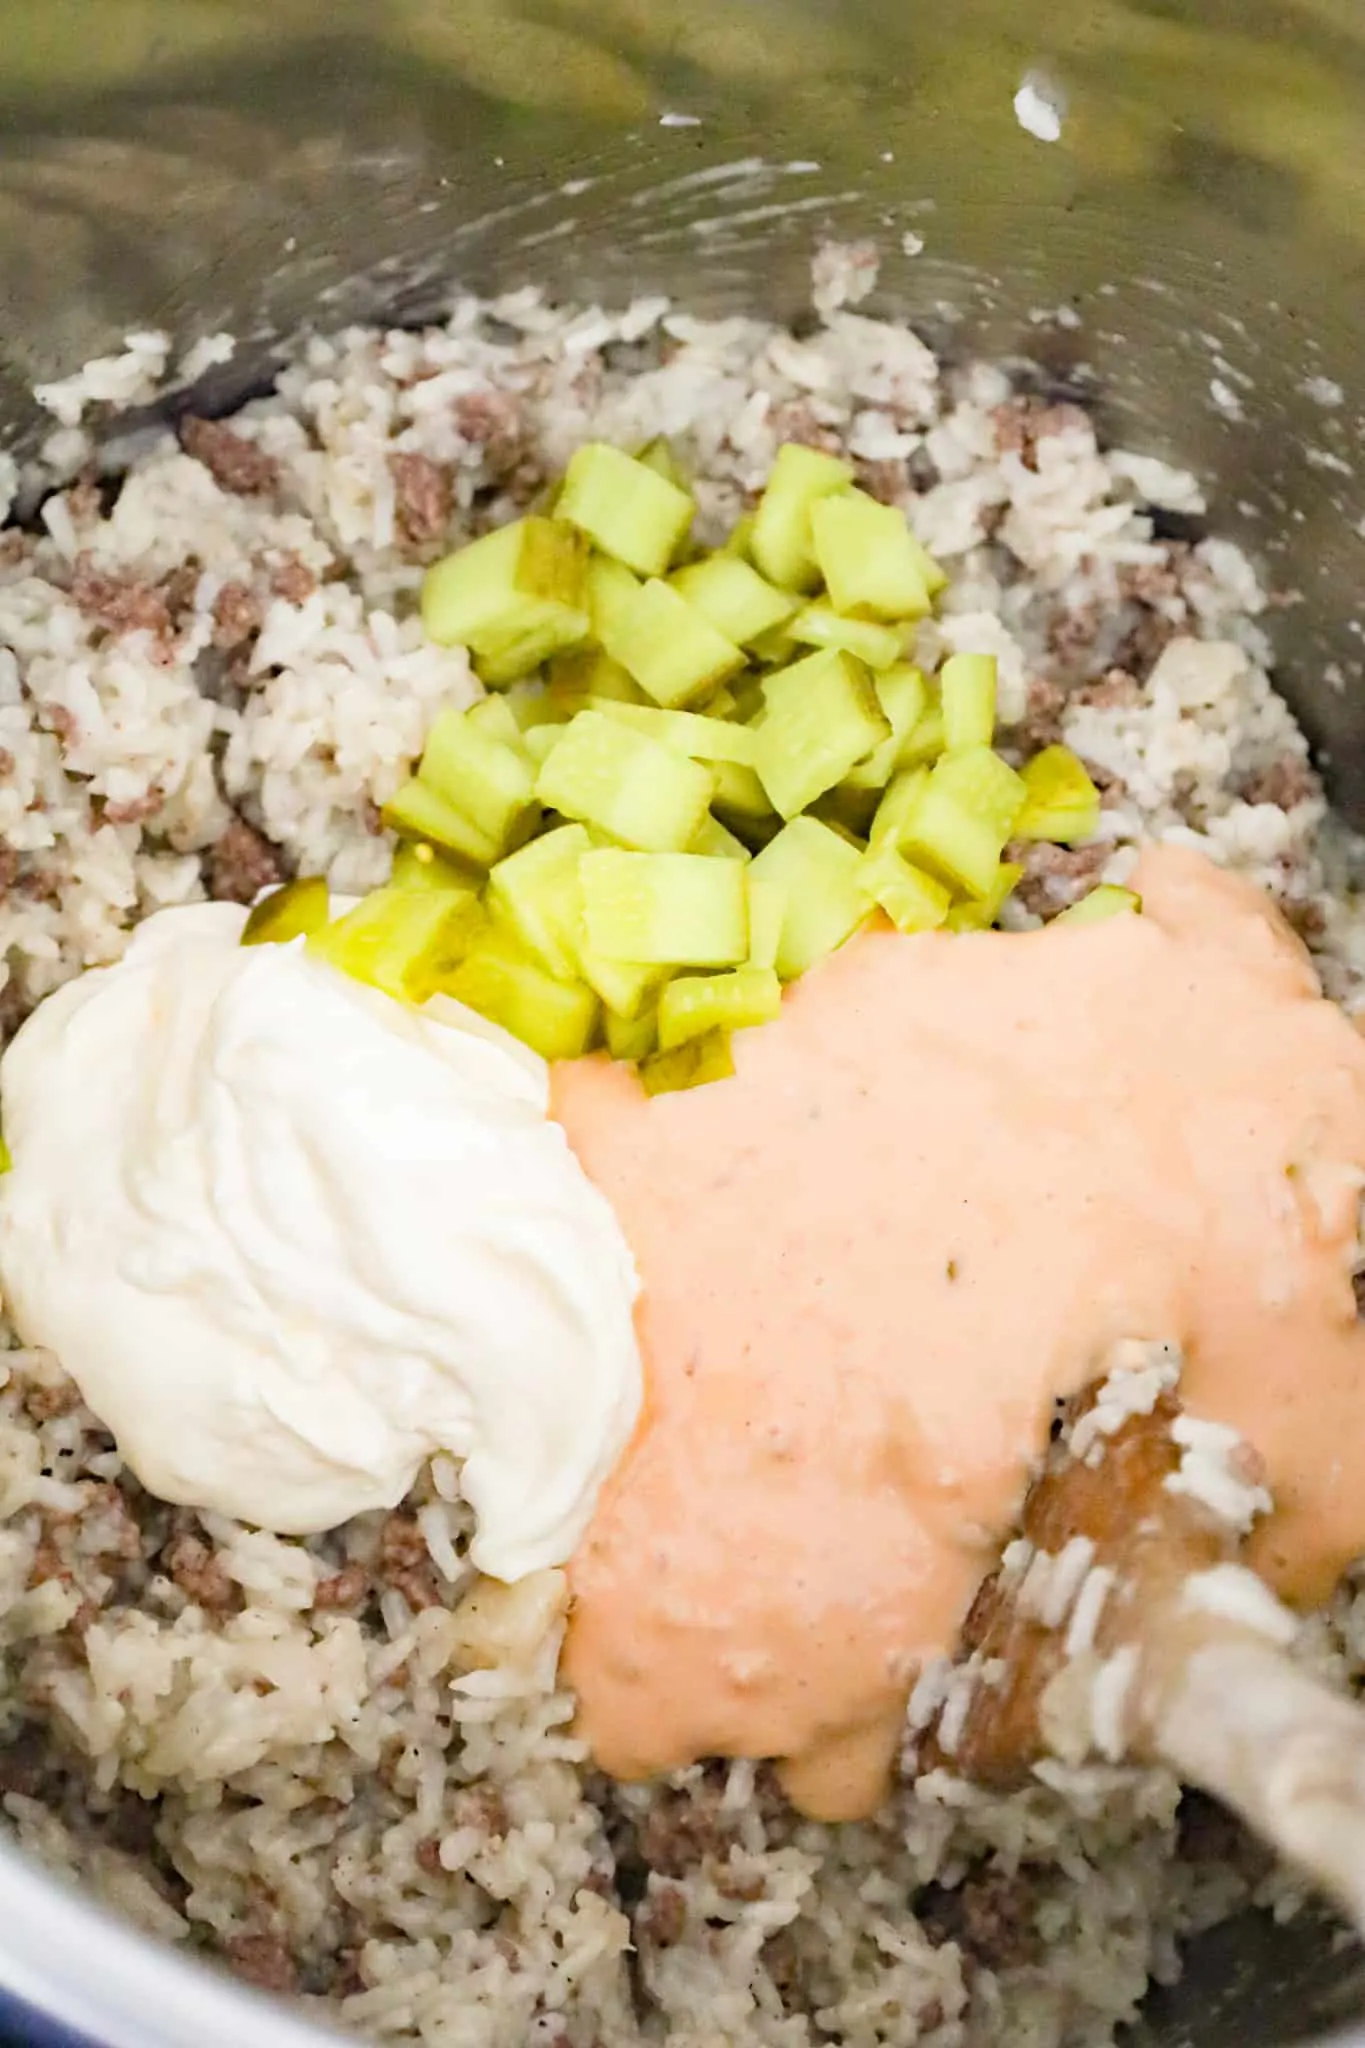 diced dill pickles, mayo and Thousand Island dressing on top of cooked ground beef and rice in an Instant Pot